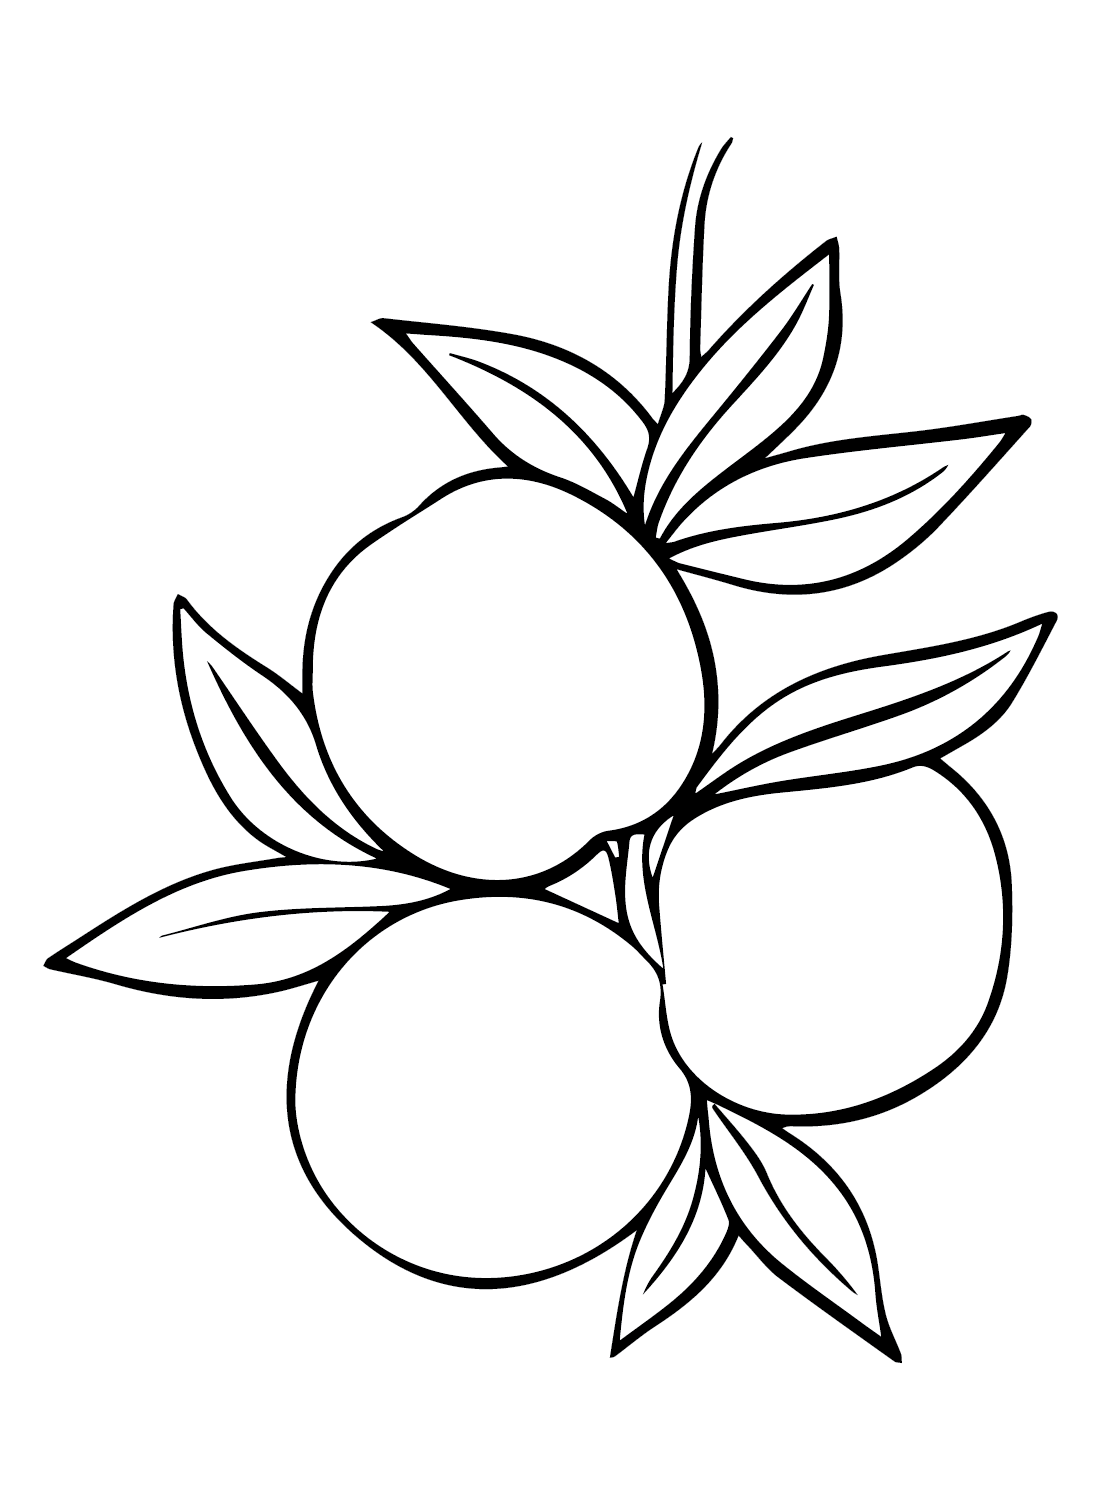 Peaches coloring pages printable for free download